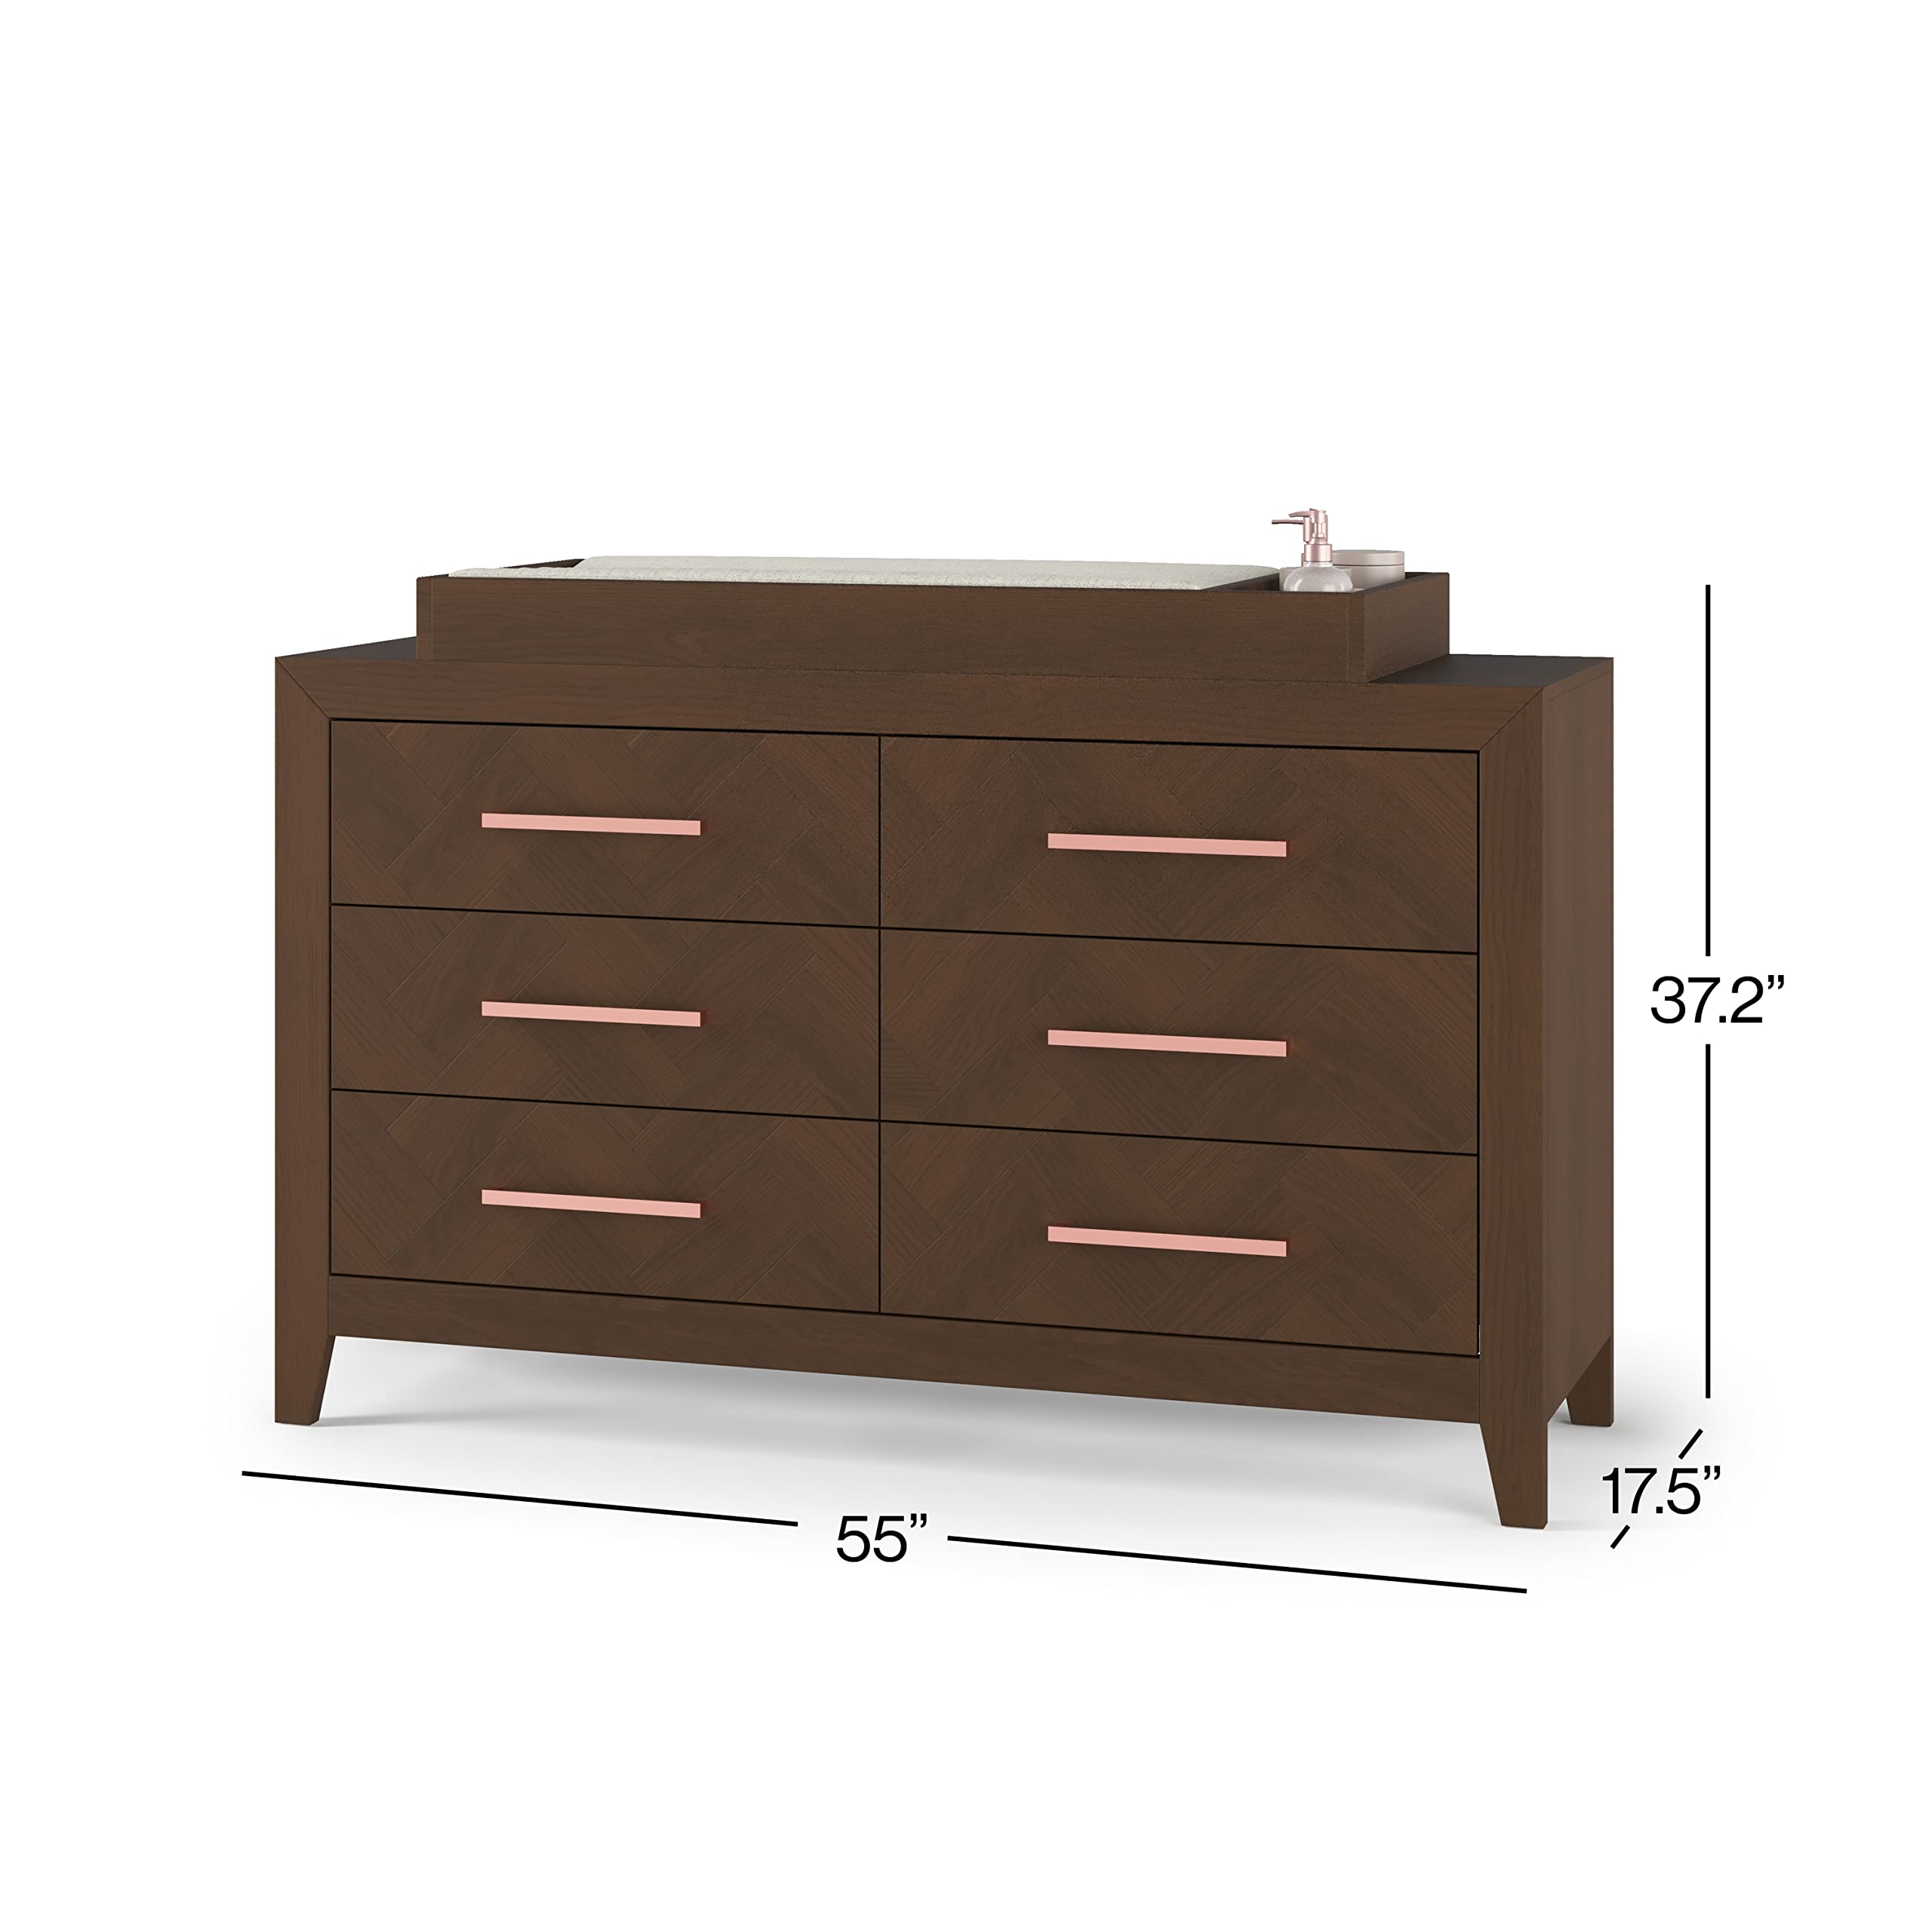 Child Craft Kieran Changing Table Topper for Dresser, Brown, Toasted Chestnut